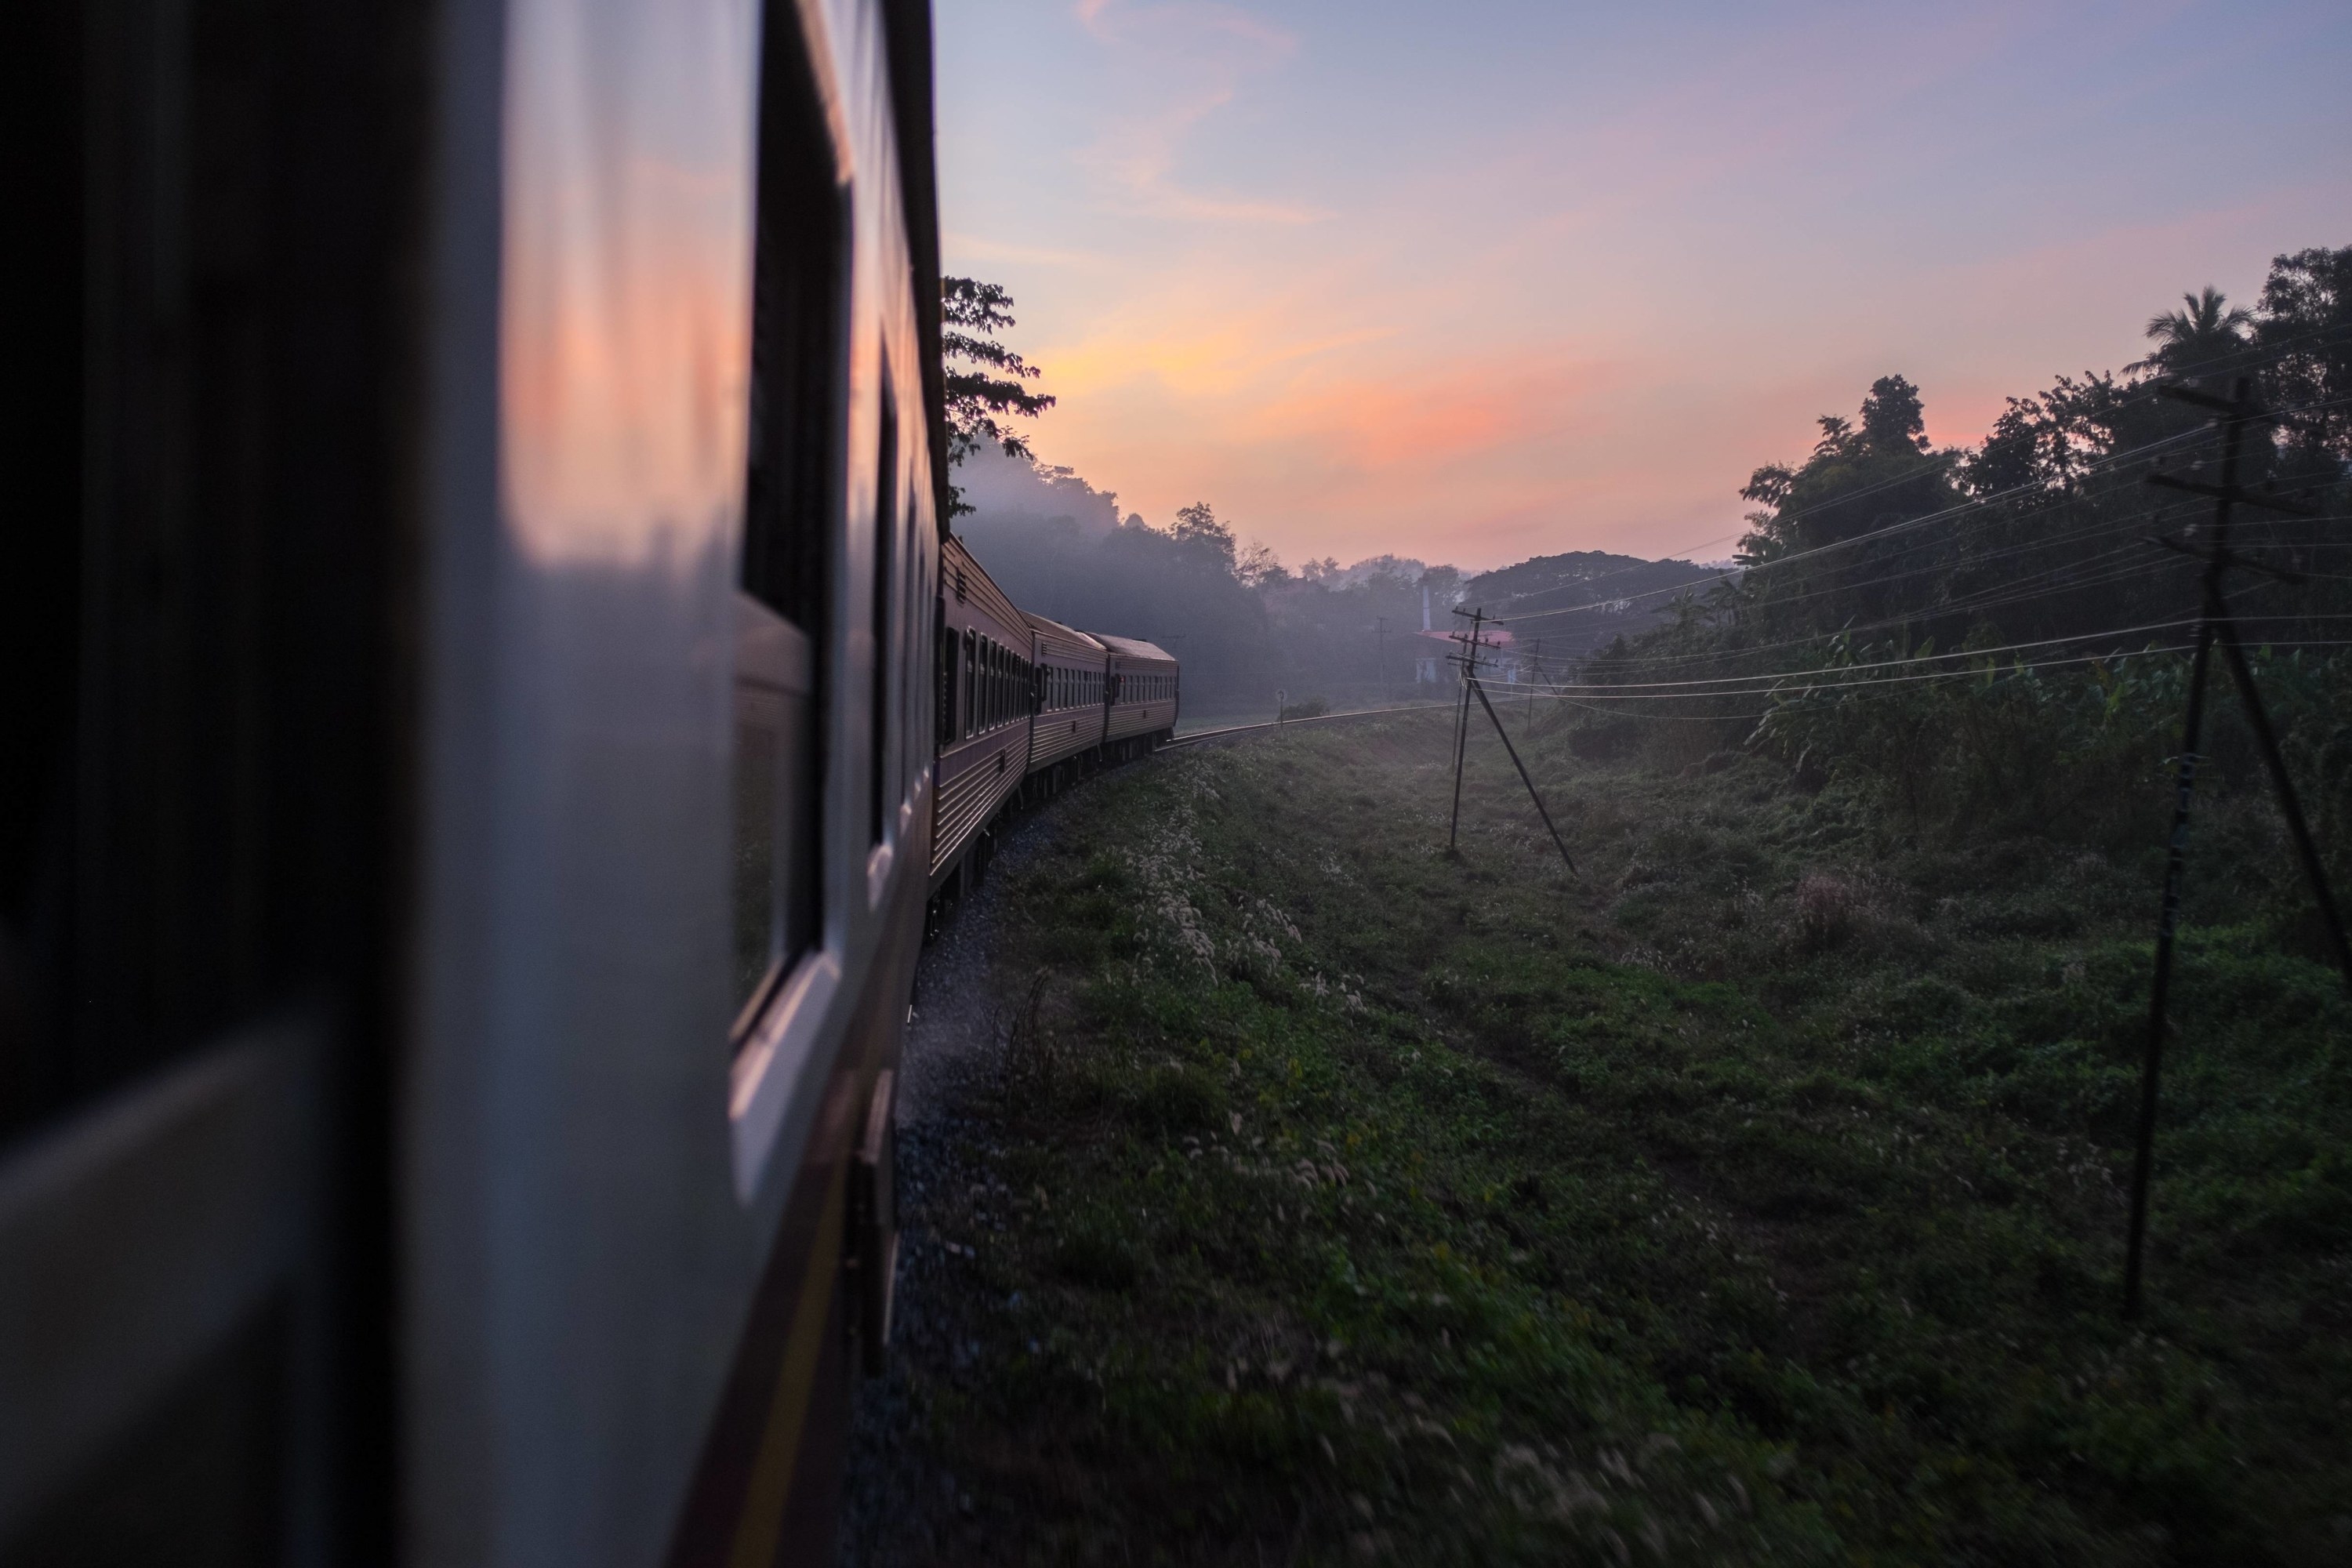 the end of a train, taken from a window within, as the train travels through lush greenery to Chiang Mai from Bangkok